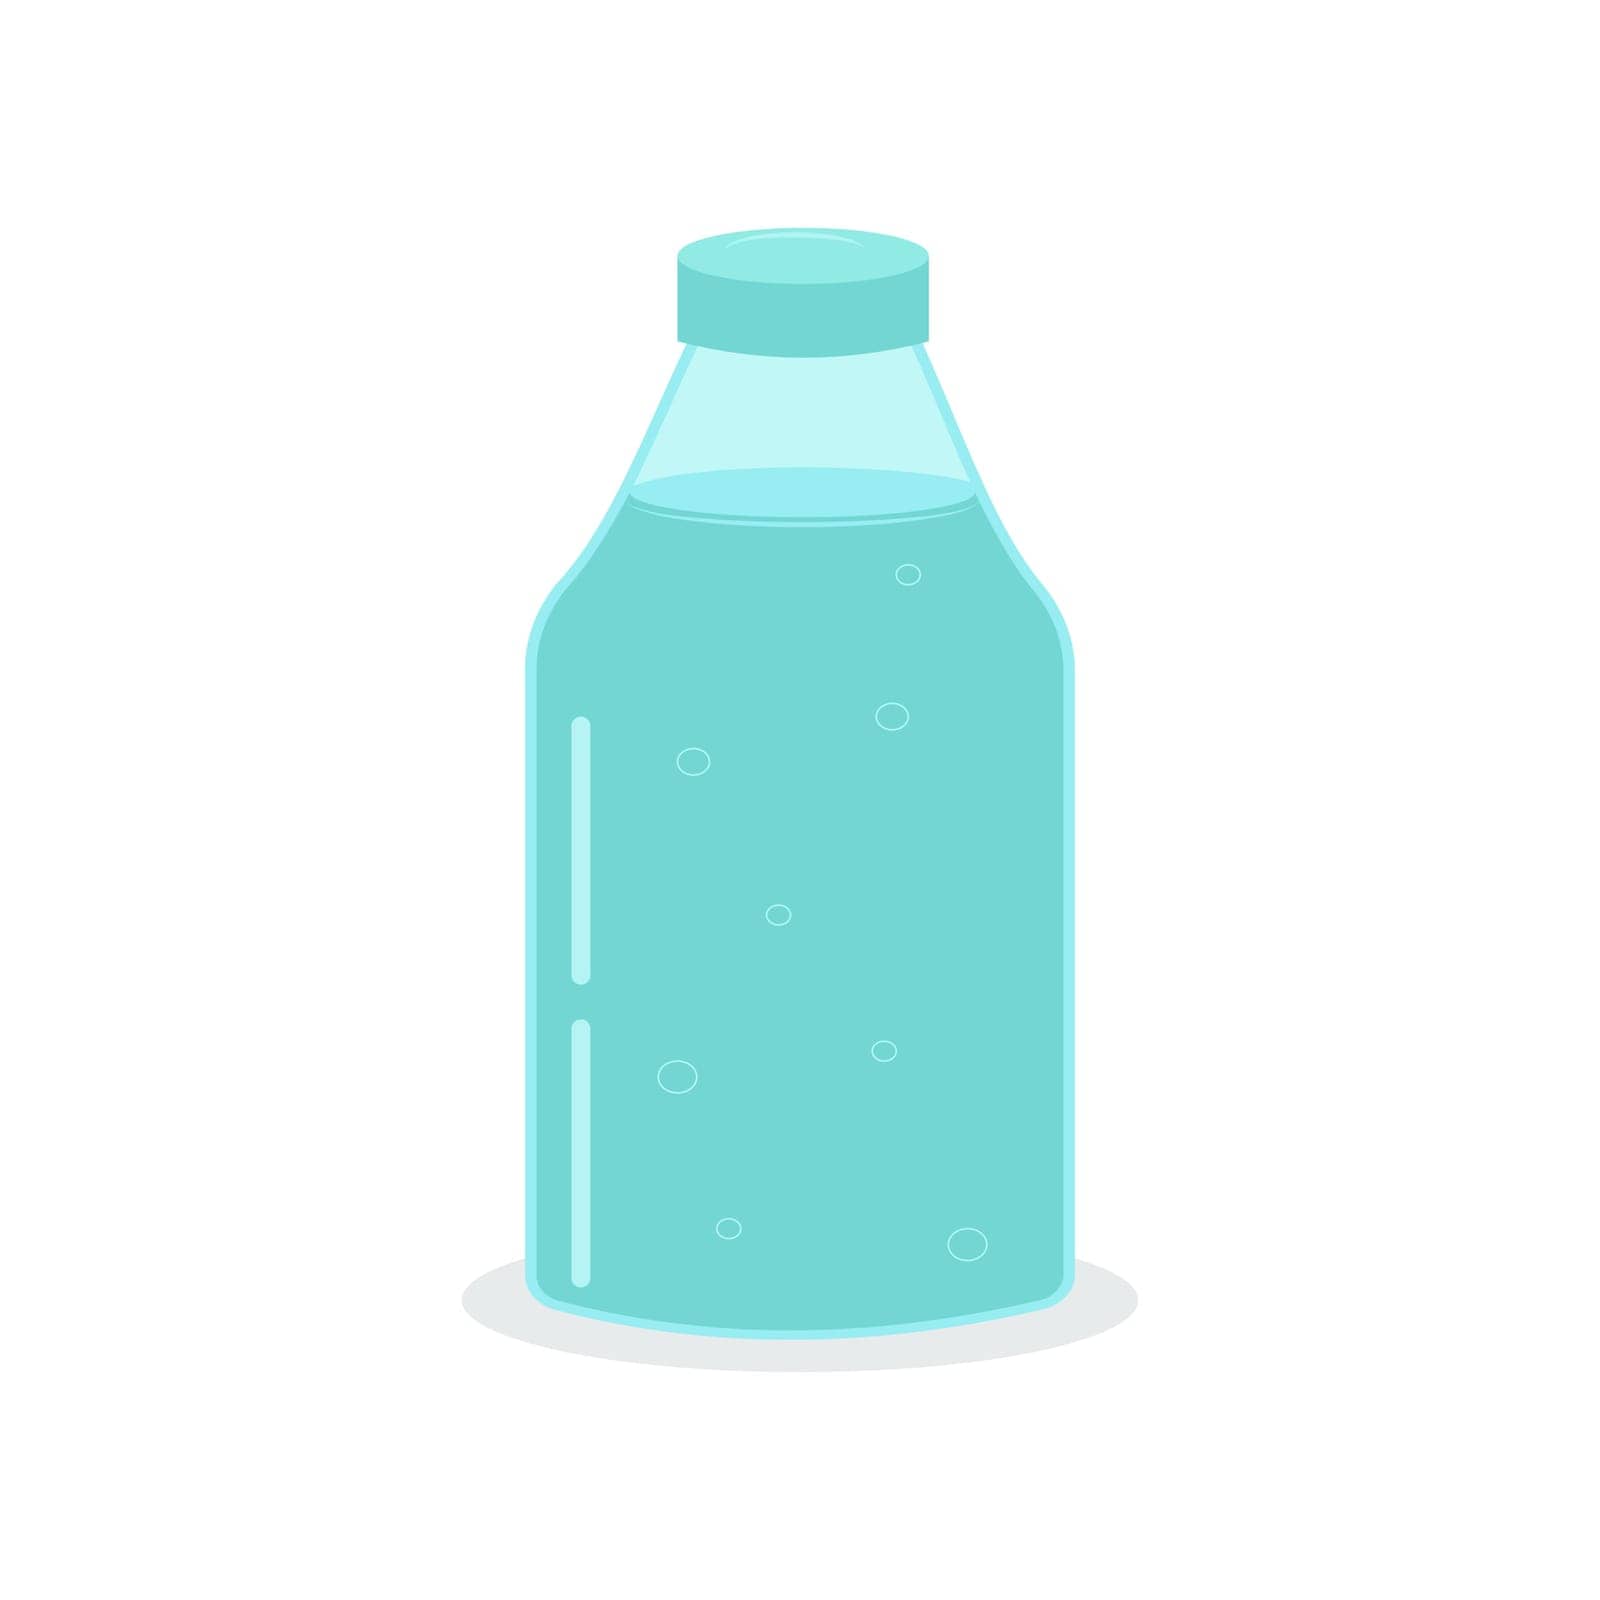 A bottle of clean fresh drinking water. Vector illustration. Flat style.